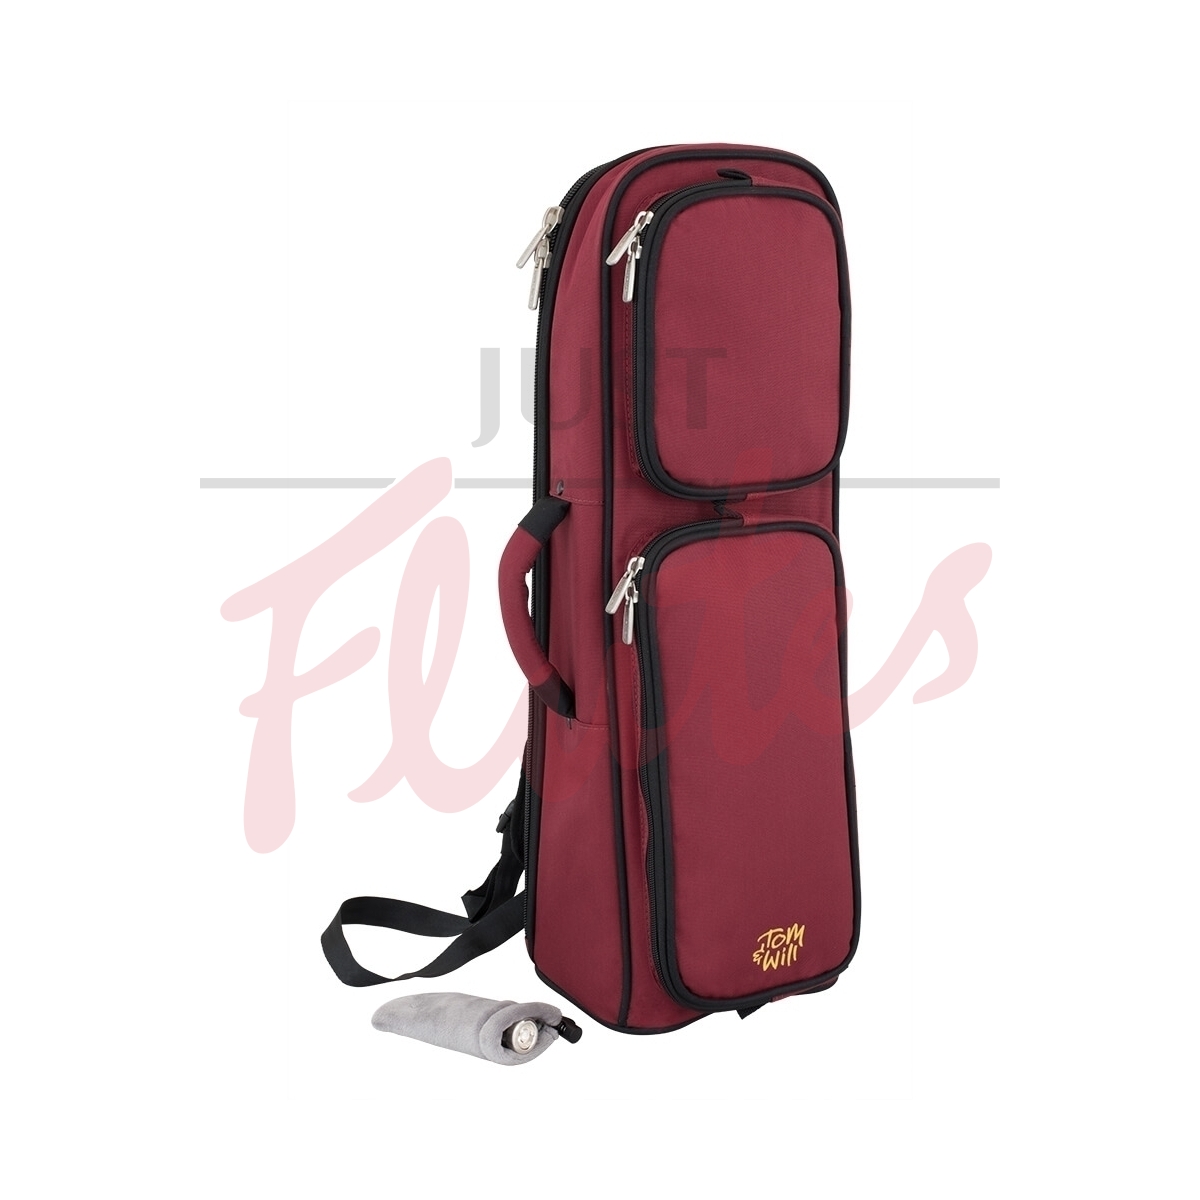 tom and will 26TP-359 Trumpet Gig Bag, Burgundy with Black Trim